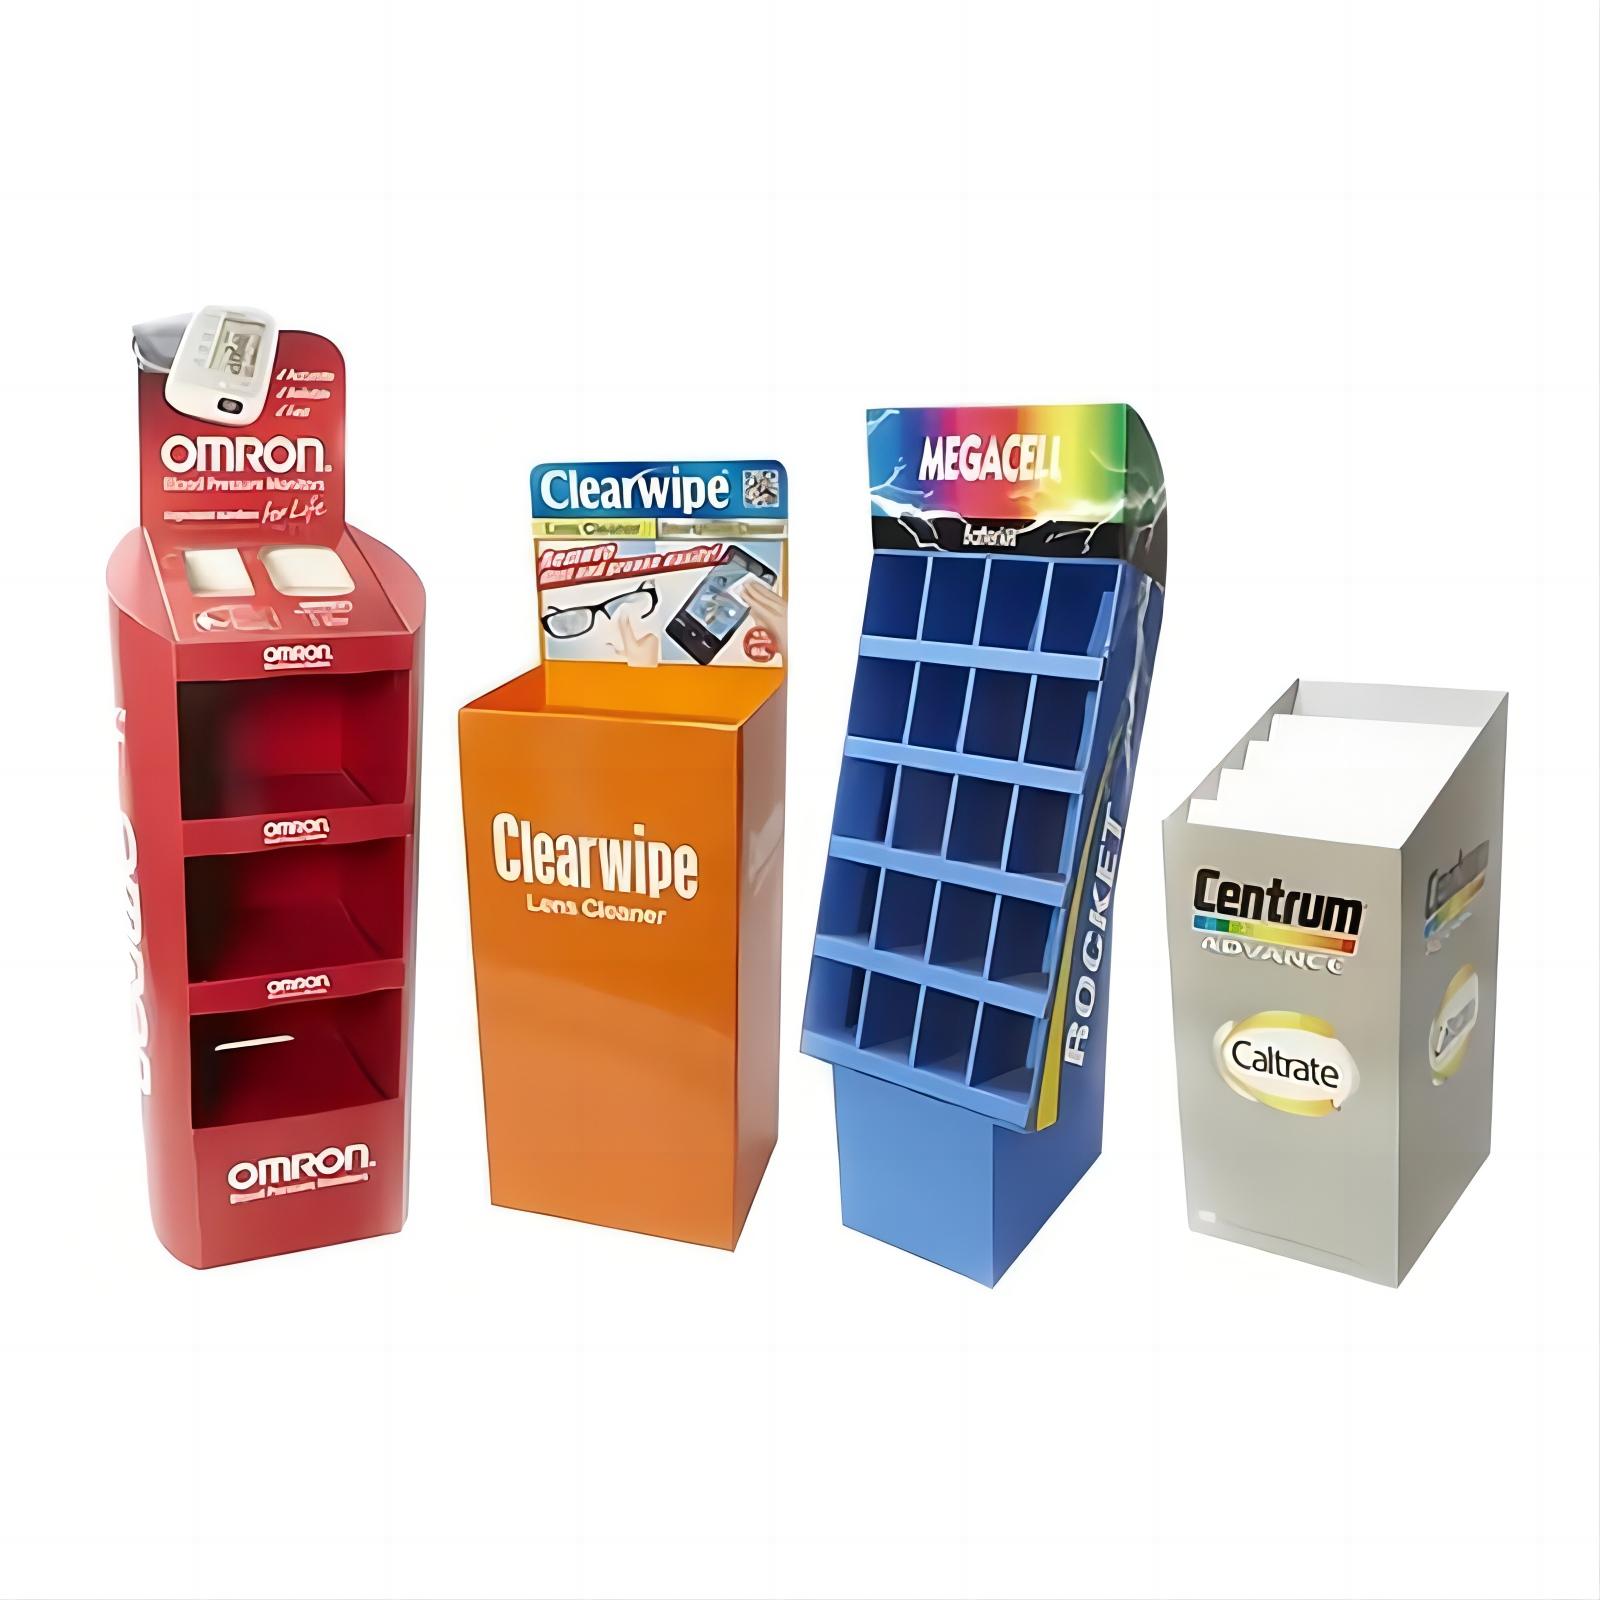 Dump Bins – Ideal for Creating Impulse Purchases